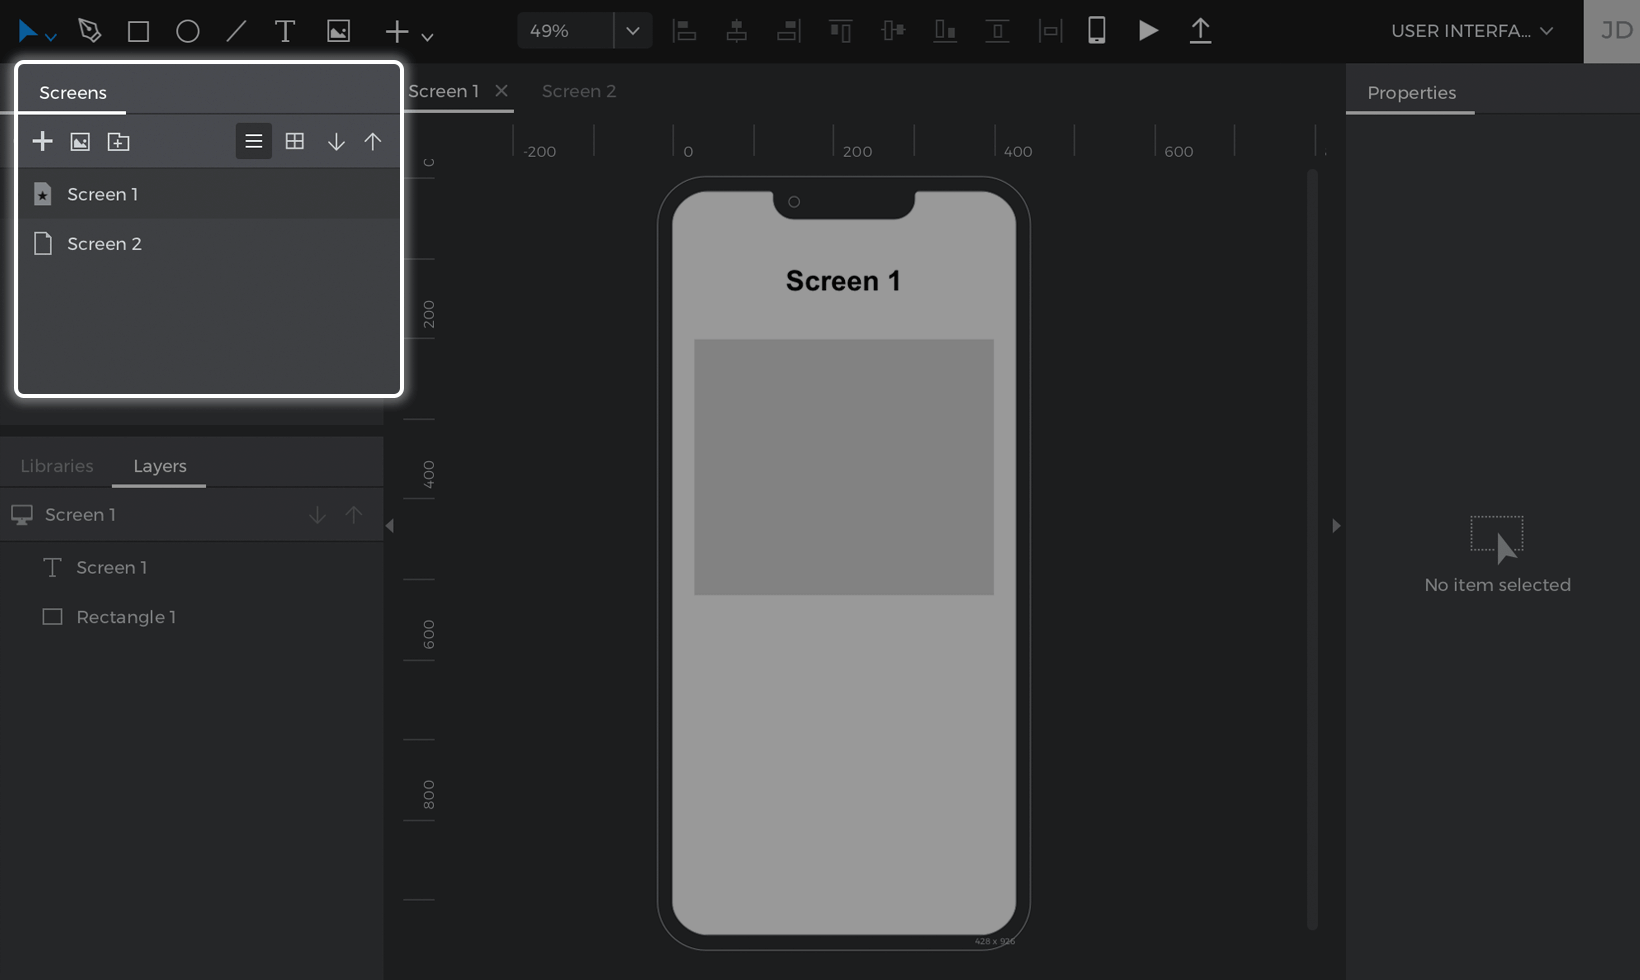 Create a prototype with 2 screens